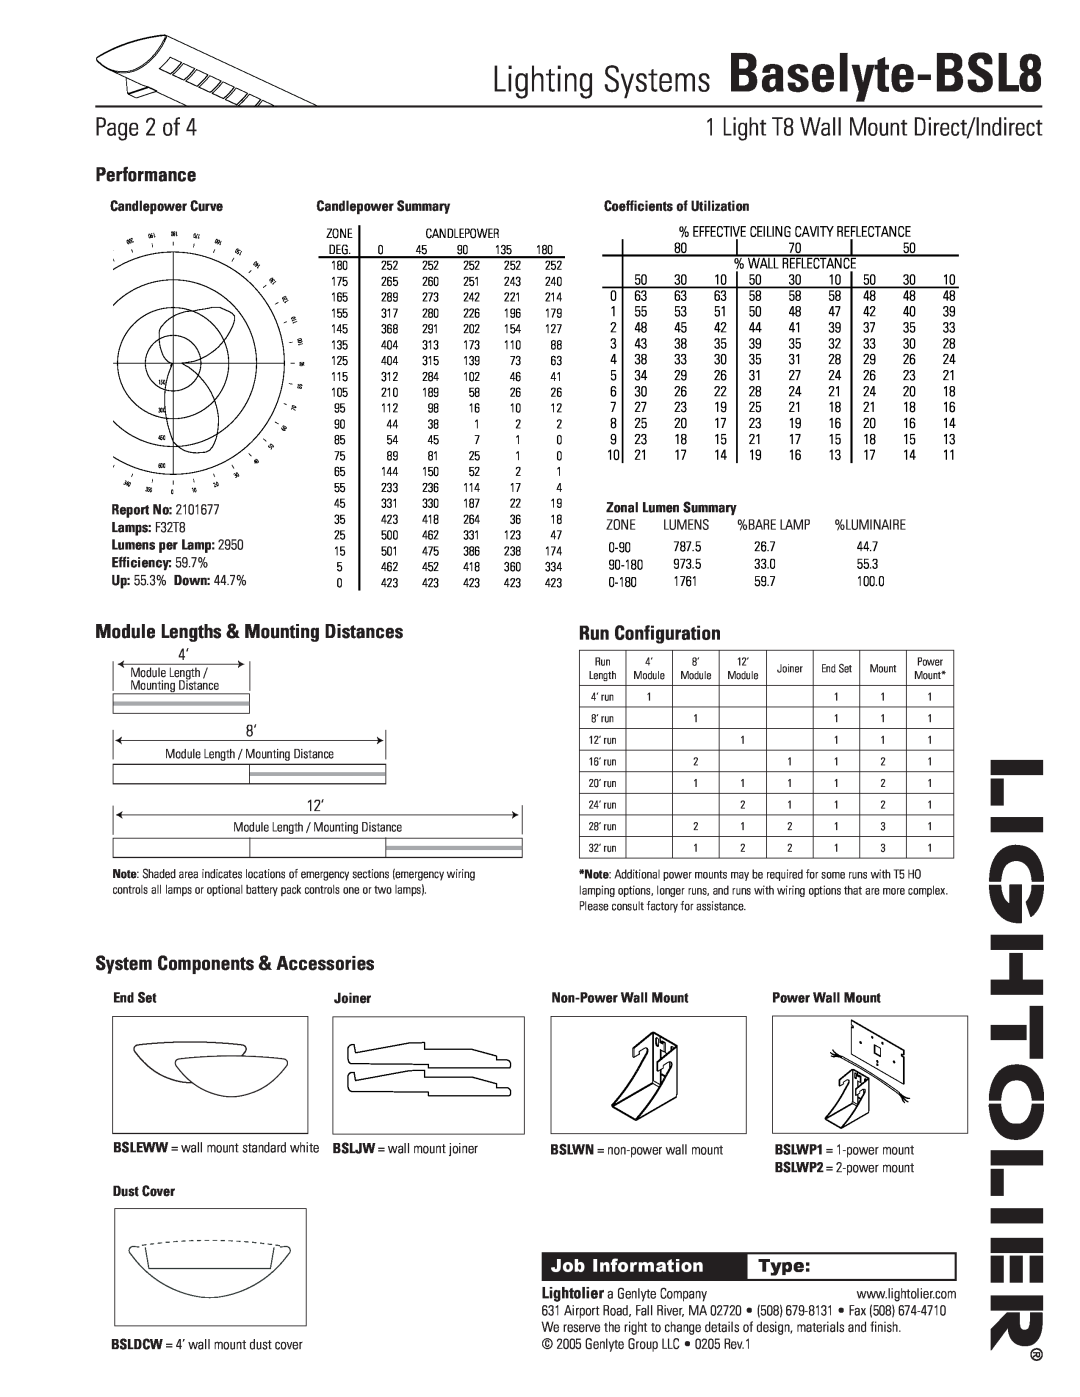 Lightolier Lighting Systems Baselyte-BSL8, Page of,  Light T8 Wall Mount Direct/Indirect, Performance, Type, End Set 